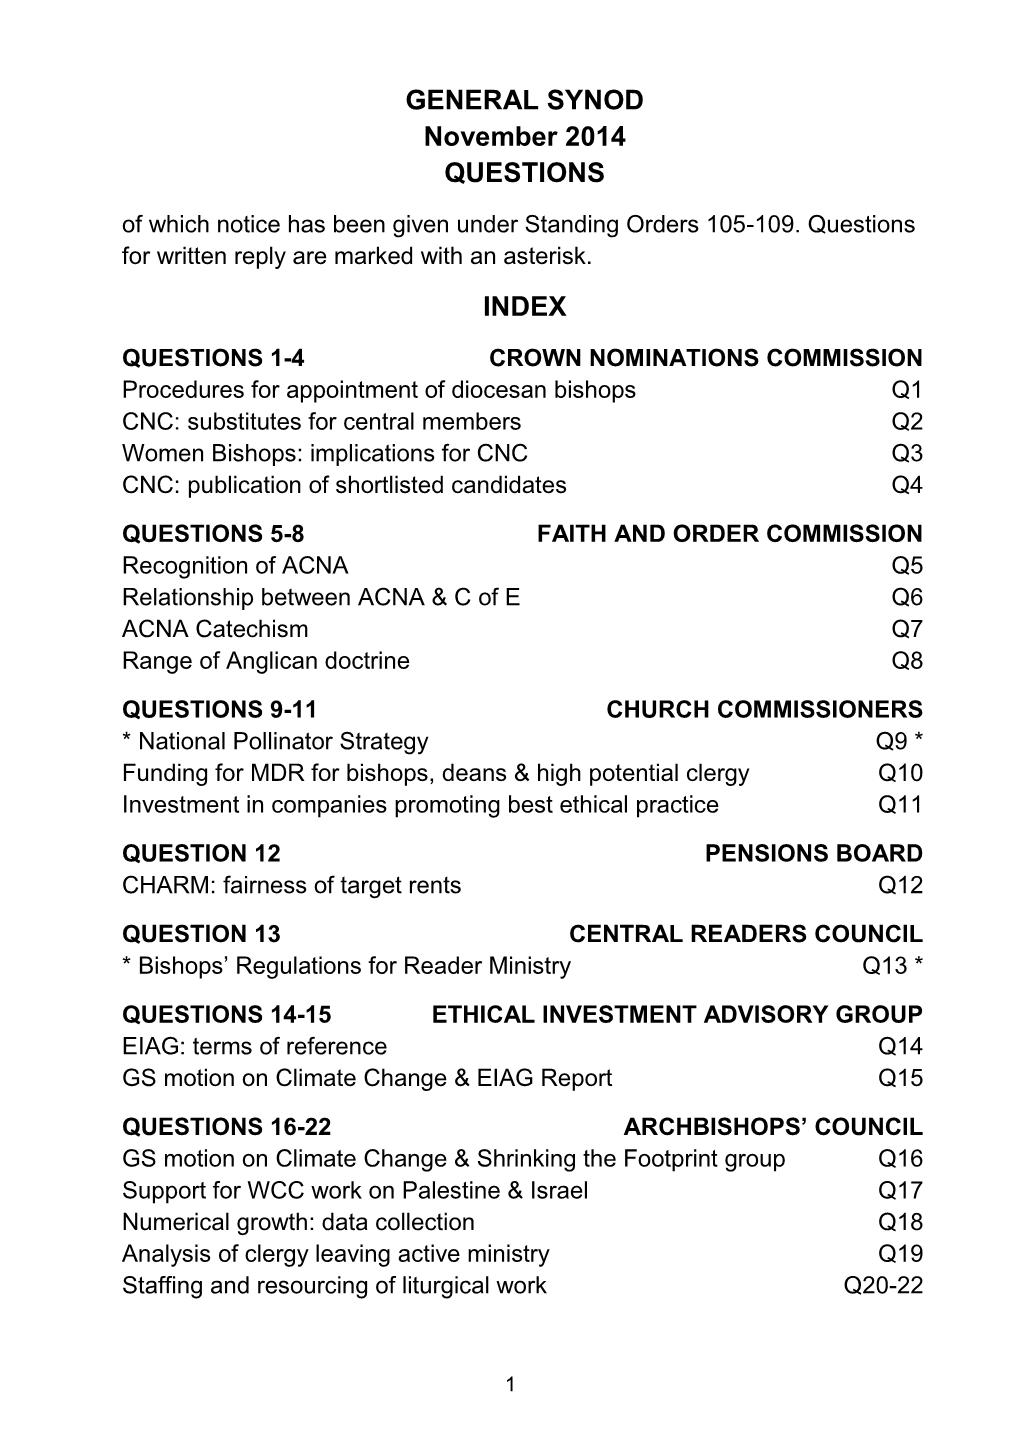 GENERAL SYNOD November 2014 QUESTIONS of Which Notice Has Been Given Under Standing Orders 105-109